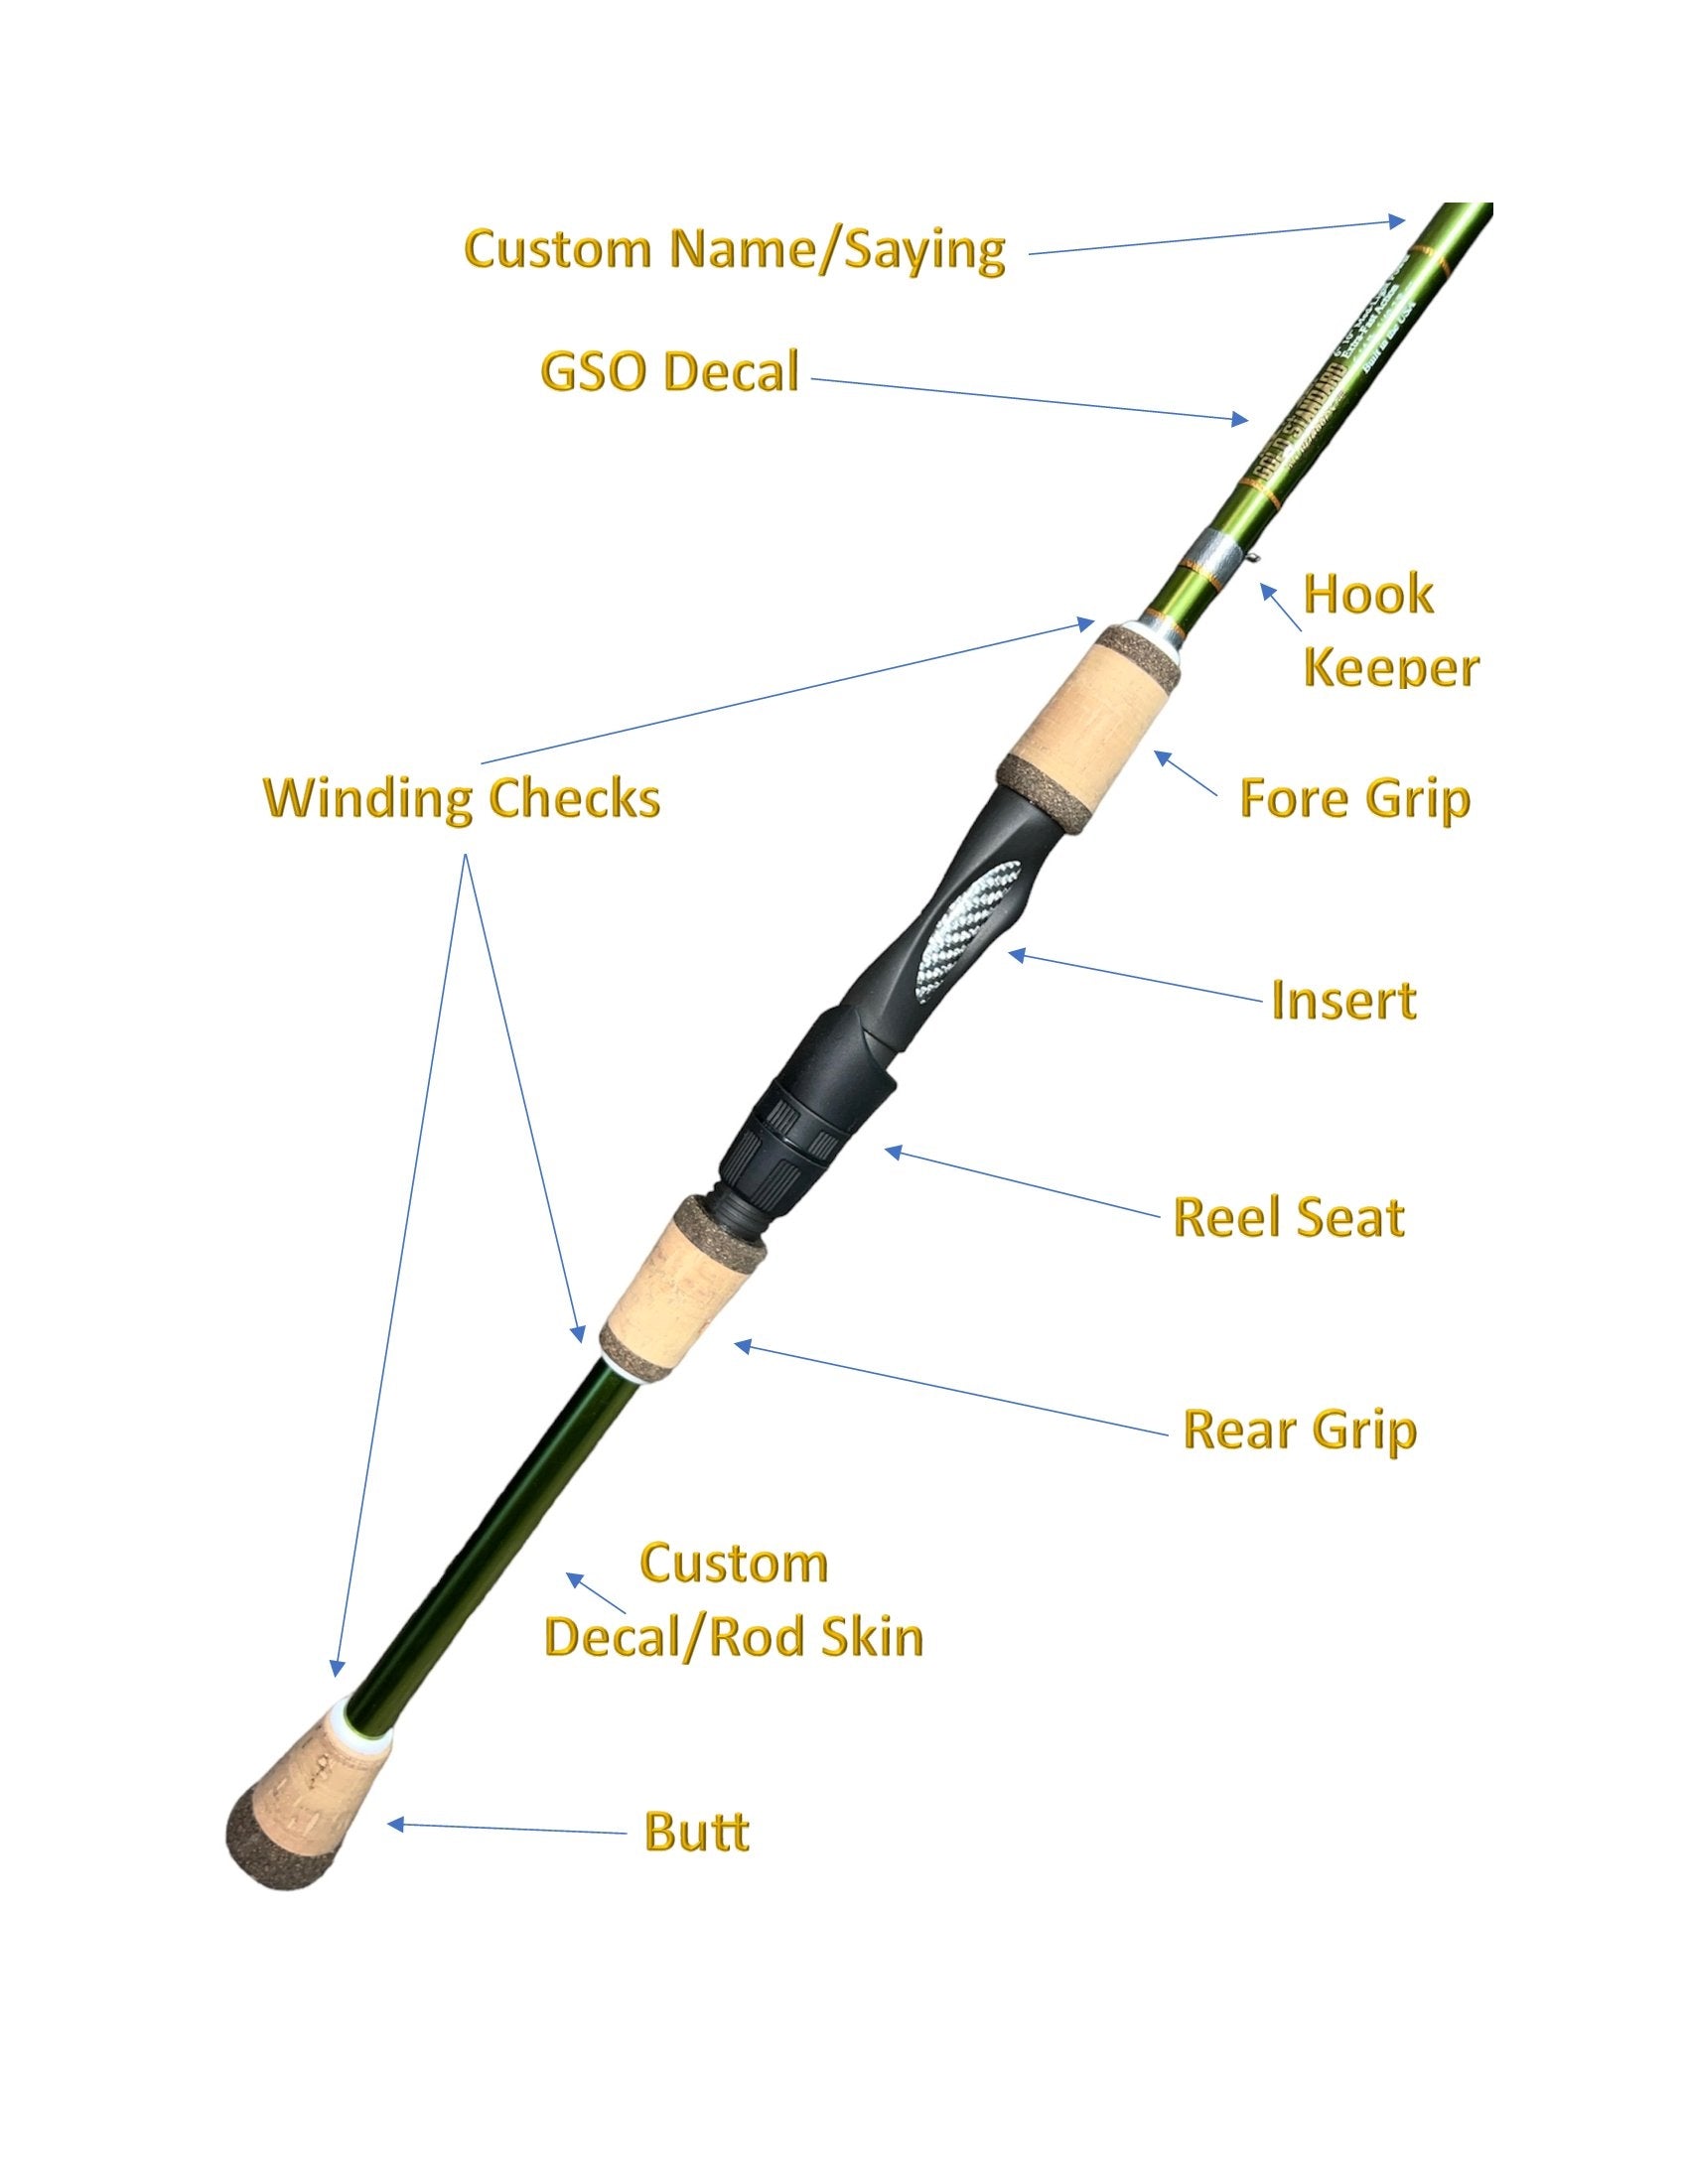 All Star Western inshore rods